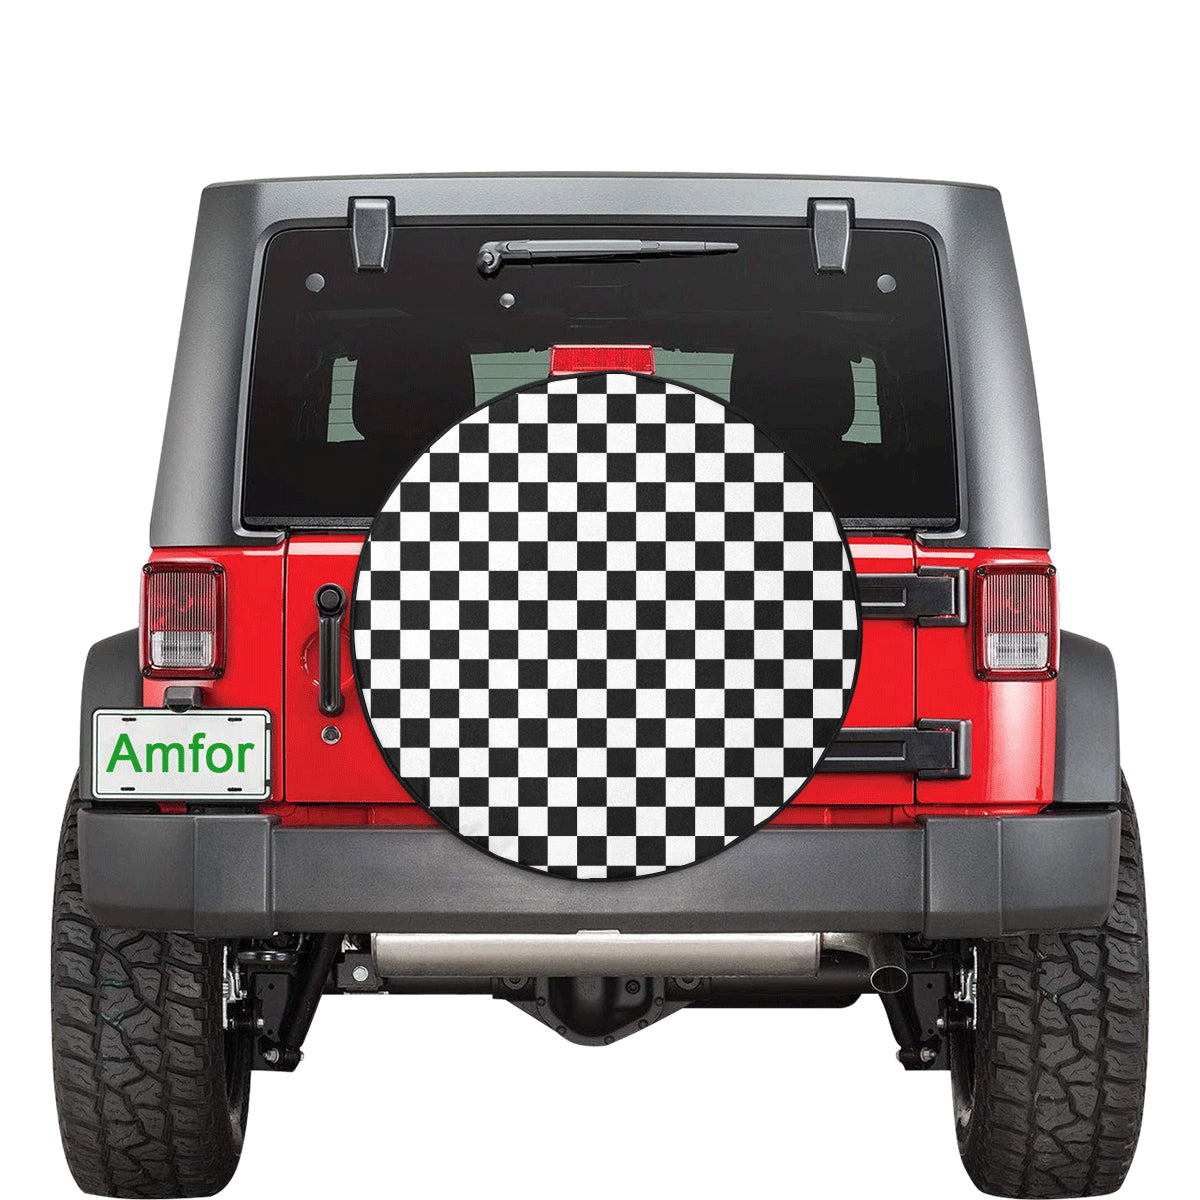 Check Spare Tire Cover, Spare Wheel Cover, Checkered White Black Custom Design Racing Flag Pattern Back Tire Adventurous Lover Gift Starcove Fashion